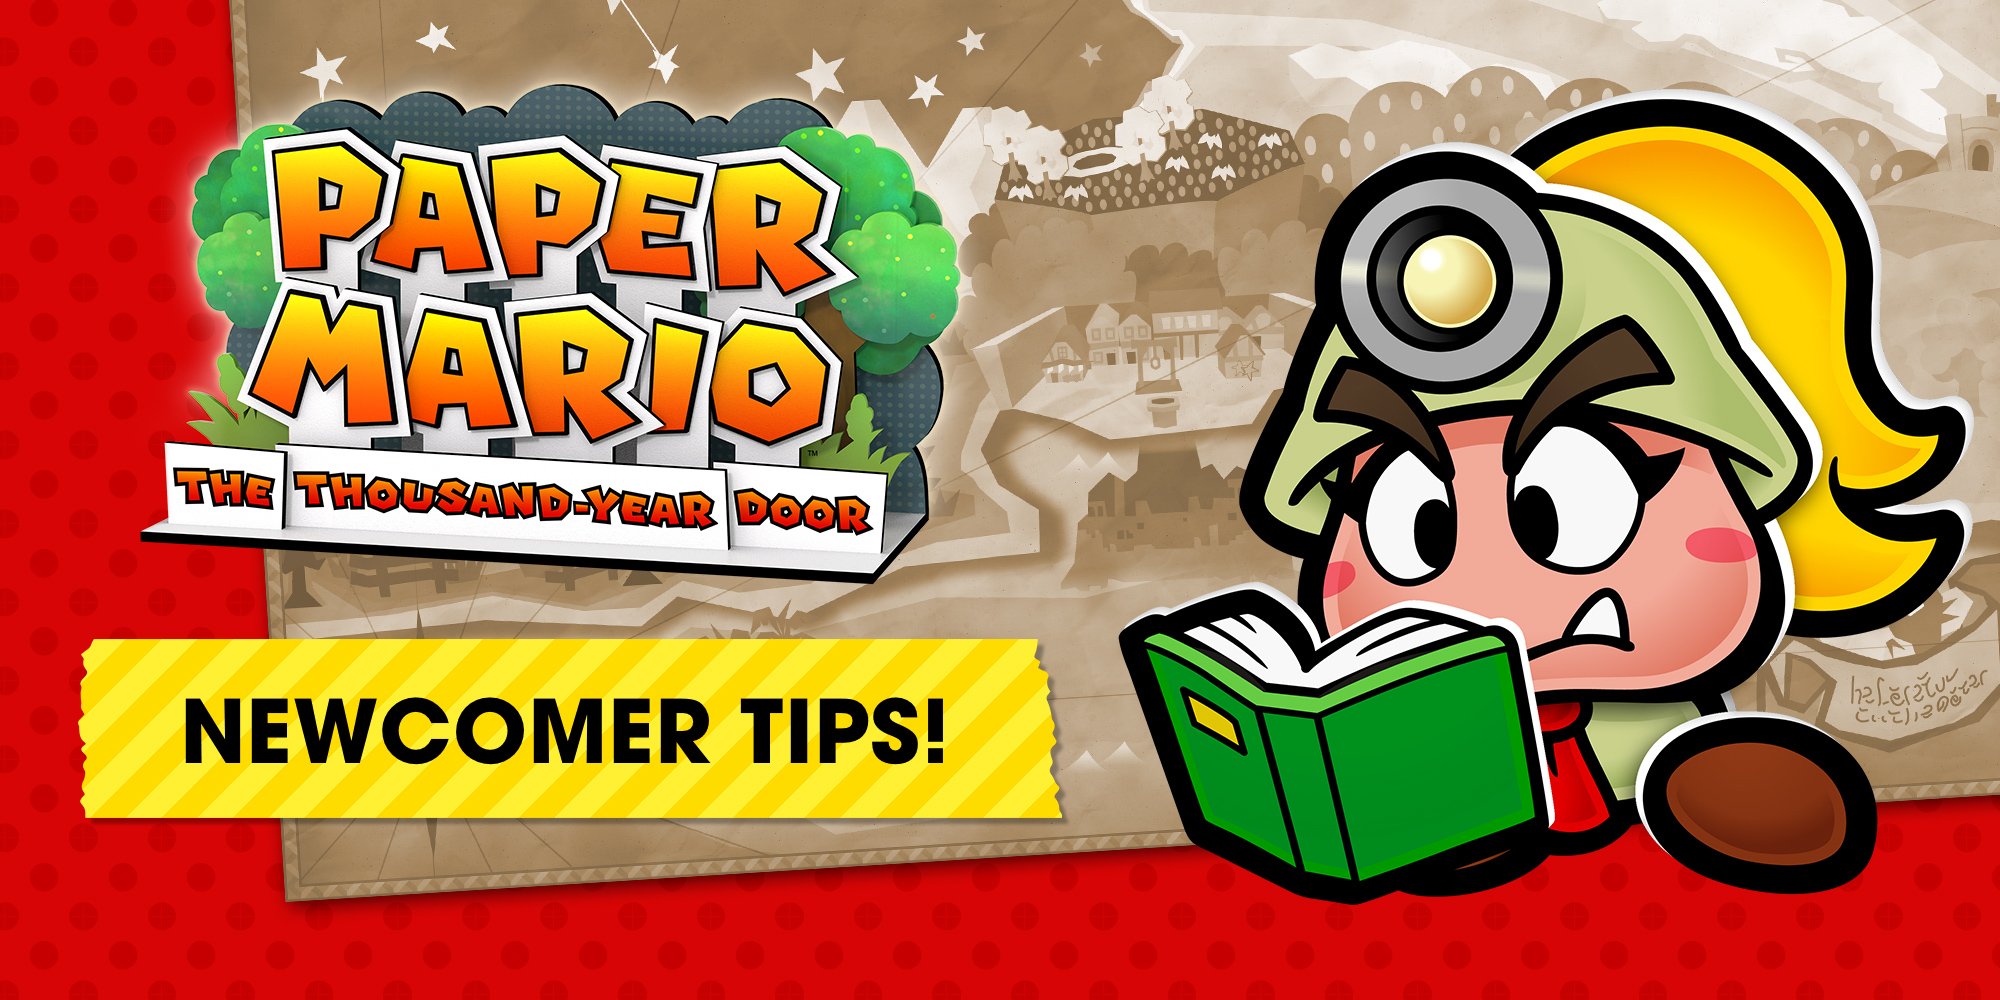 A beginner’s guide to Paper Mario: The Thousand-Year Door